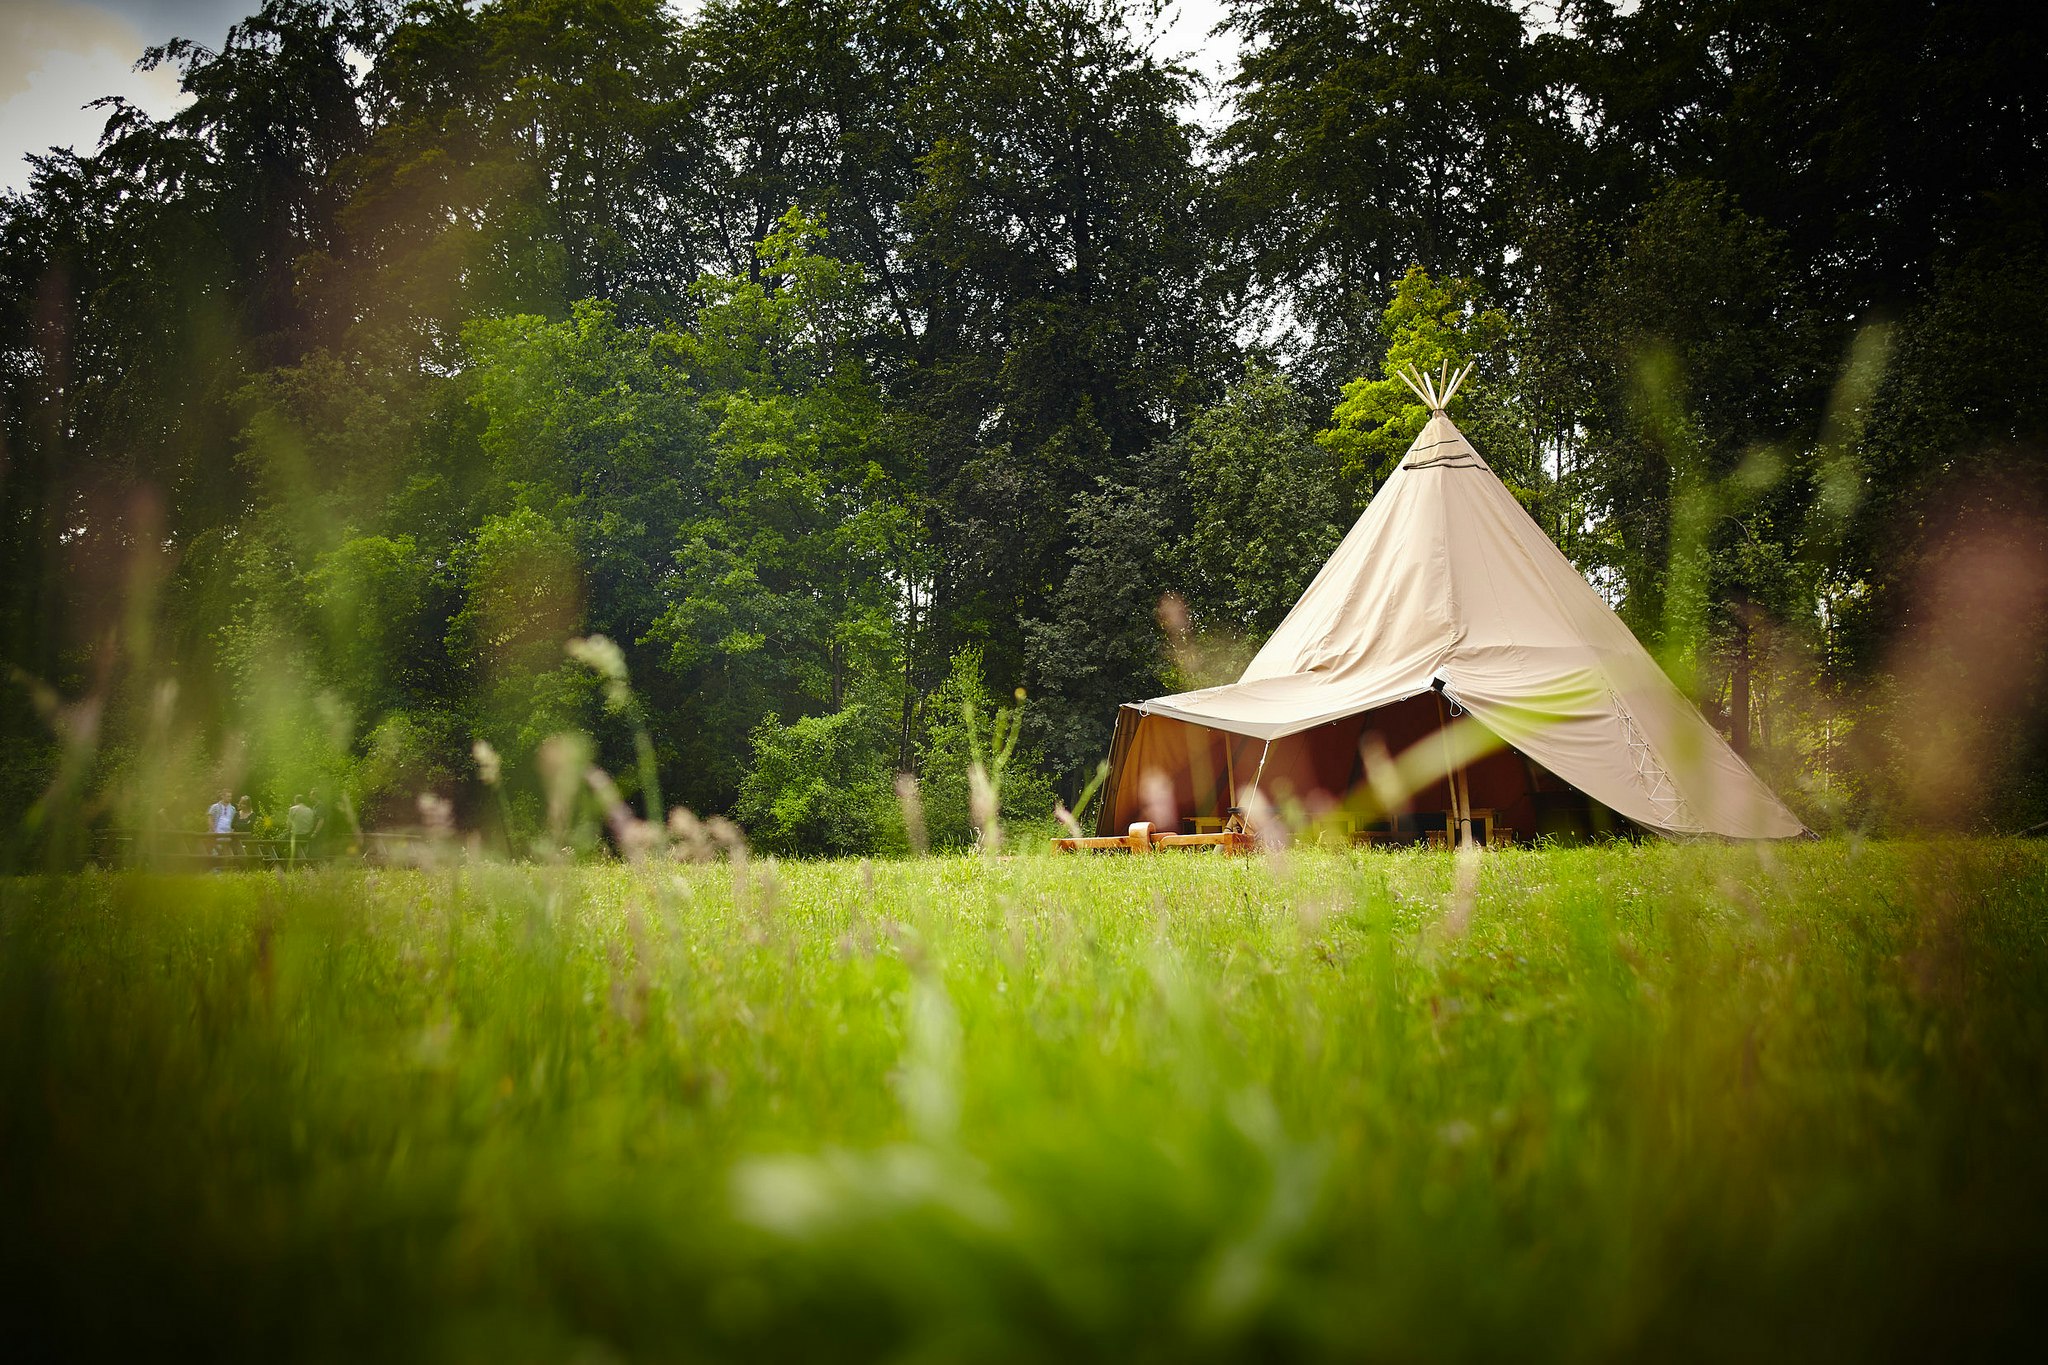 The Forest Works - Forest of Dean - Forest Tepee image 1